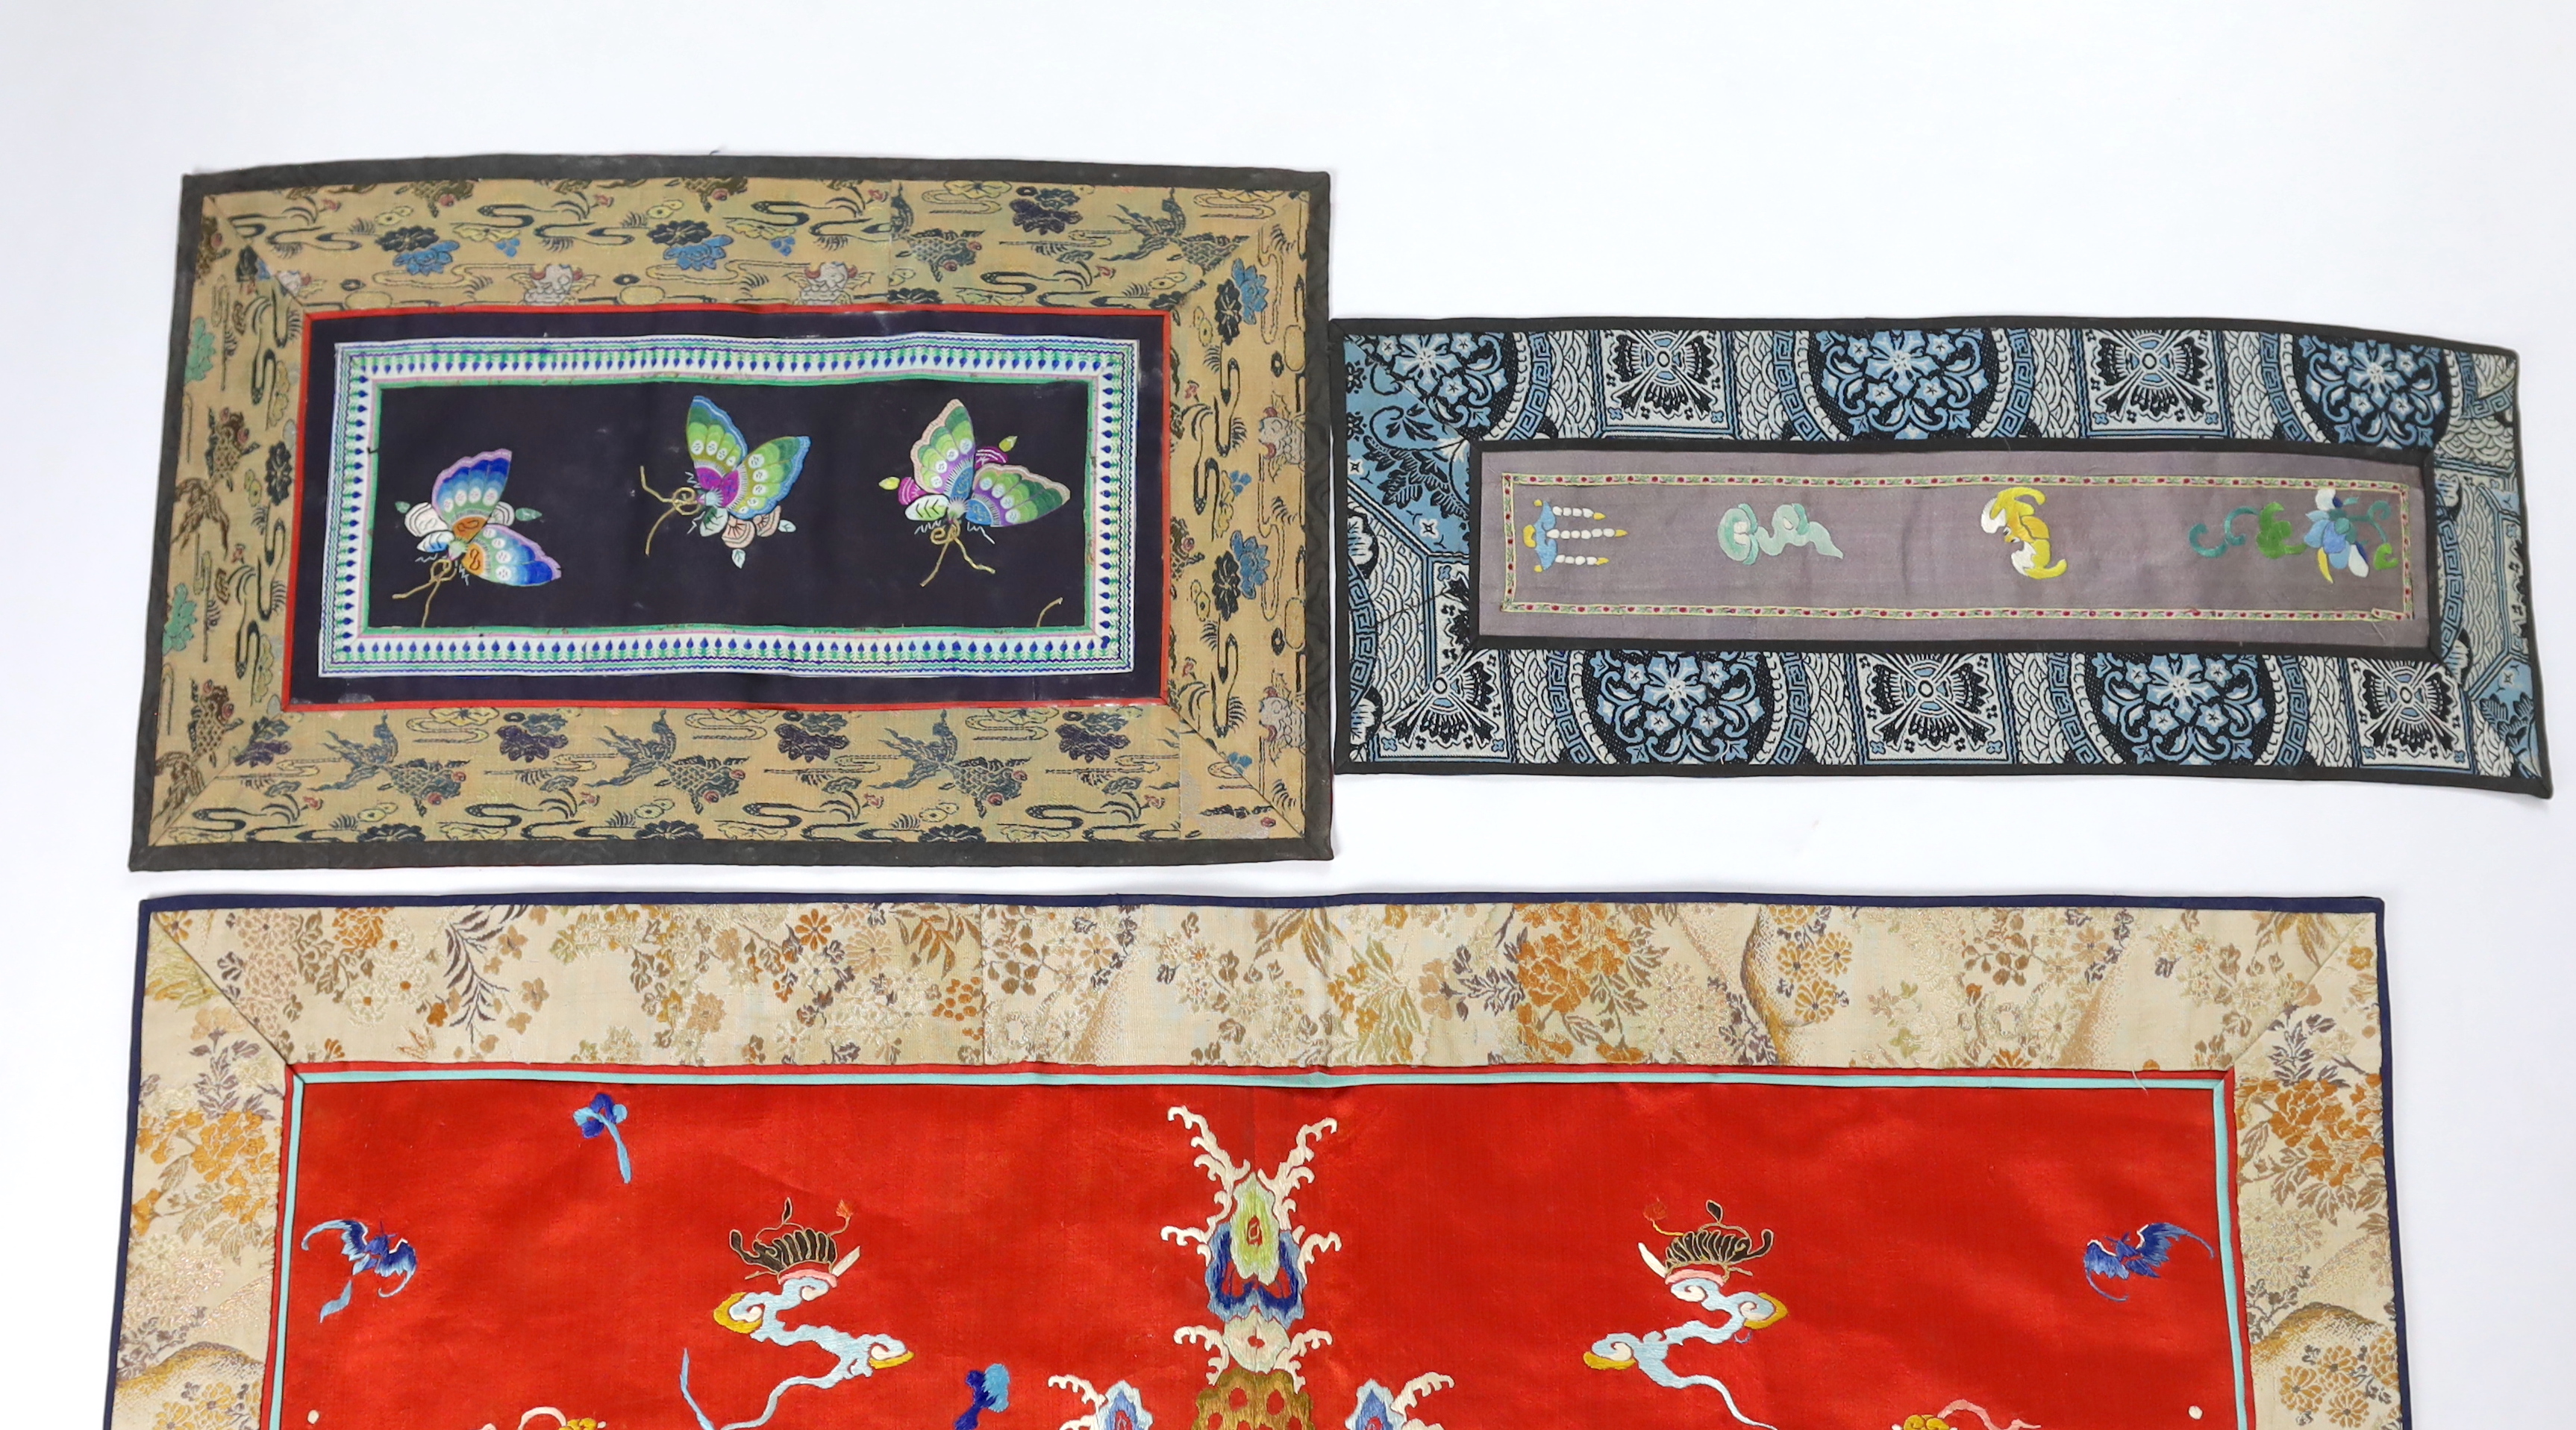 A Chinese late Qing dynasty red silk and polychrome embroidered lishui wave and flaming pearl panel, another smaller metallic dragon panel, an ornate butterfly panel and two other smaller embroidered panels with auspicio